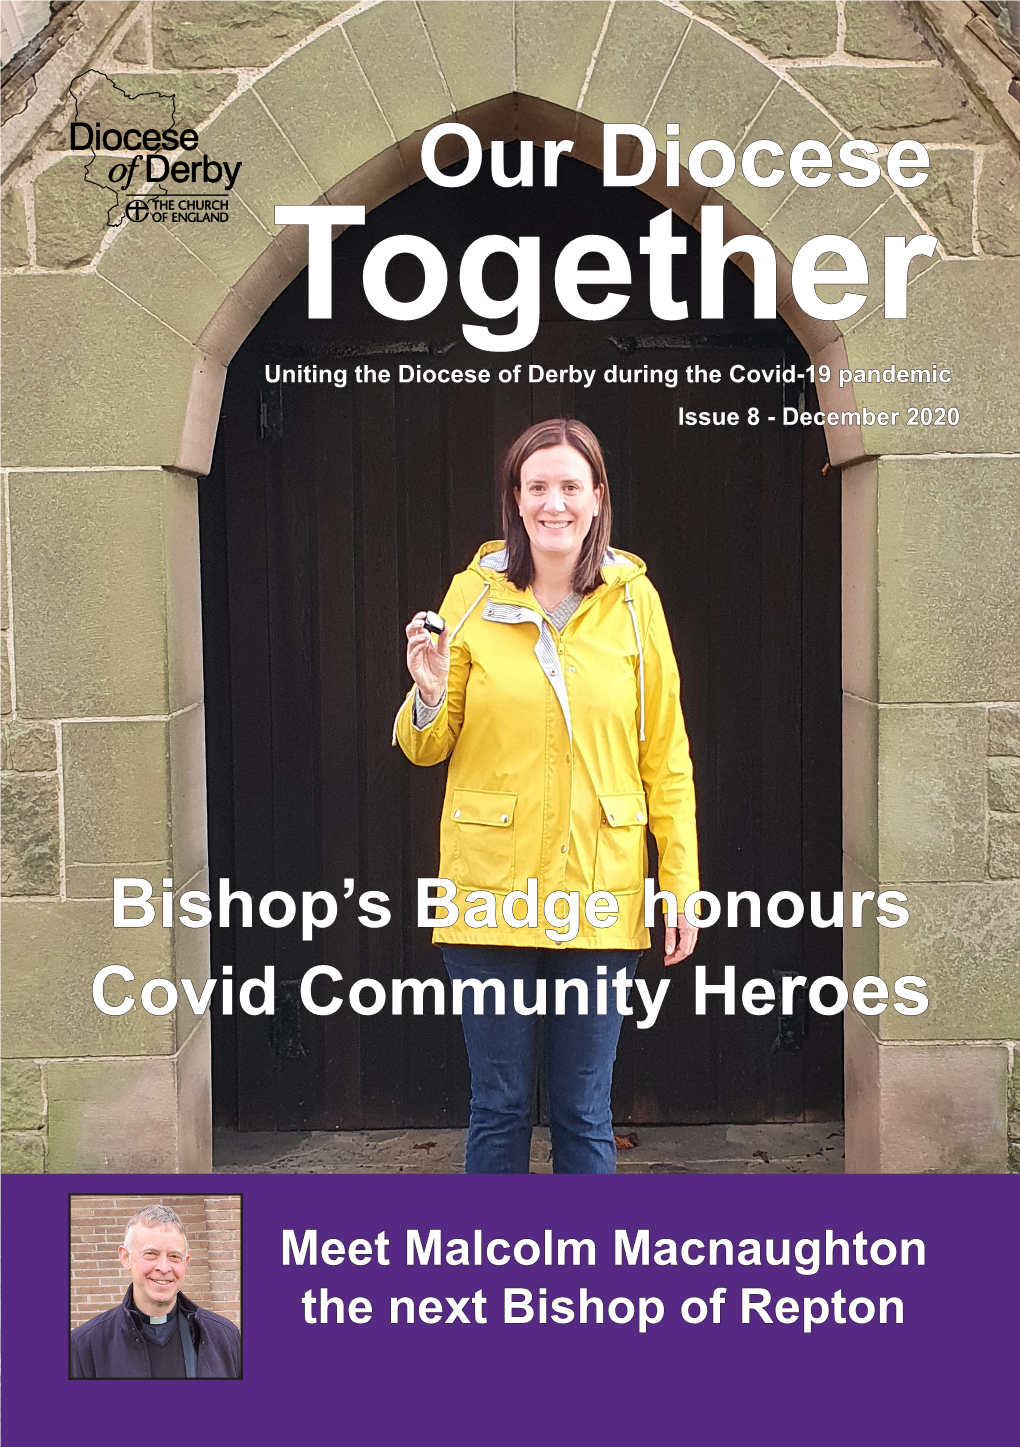 Together Uniting the Diocese of Derby During the Covid-19 Pandemic Issue 8 - December 2020